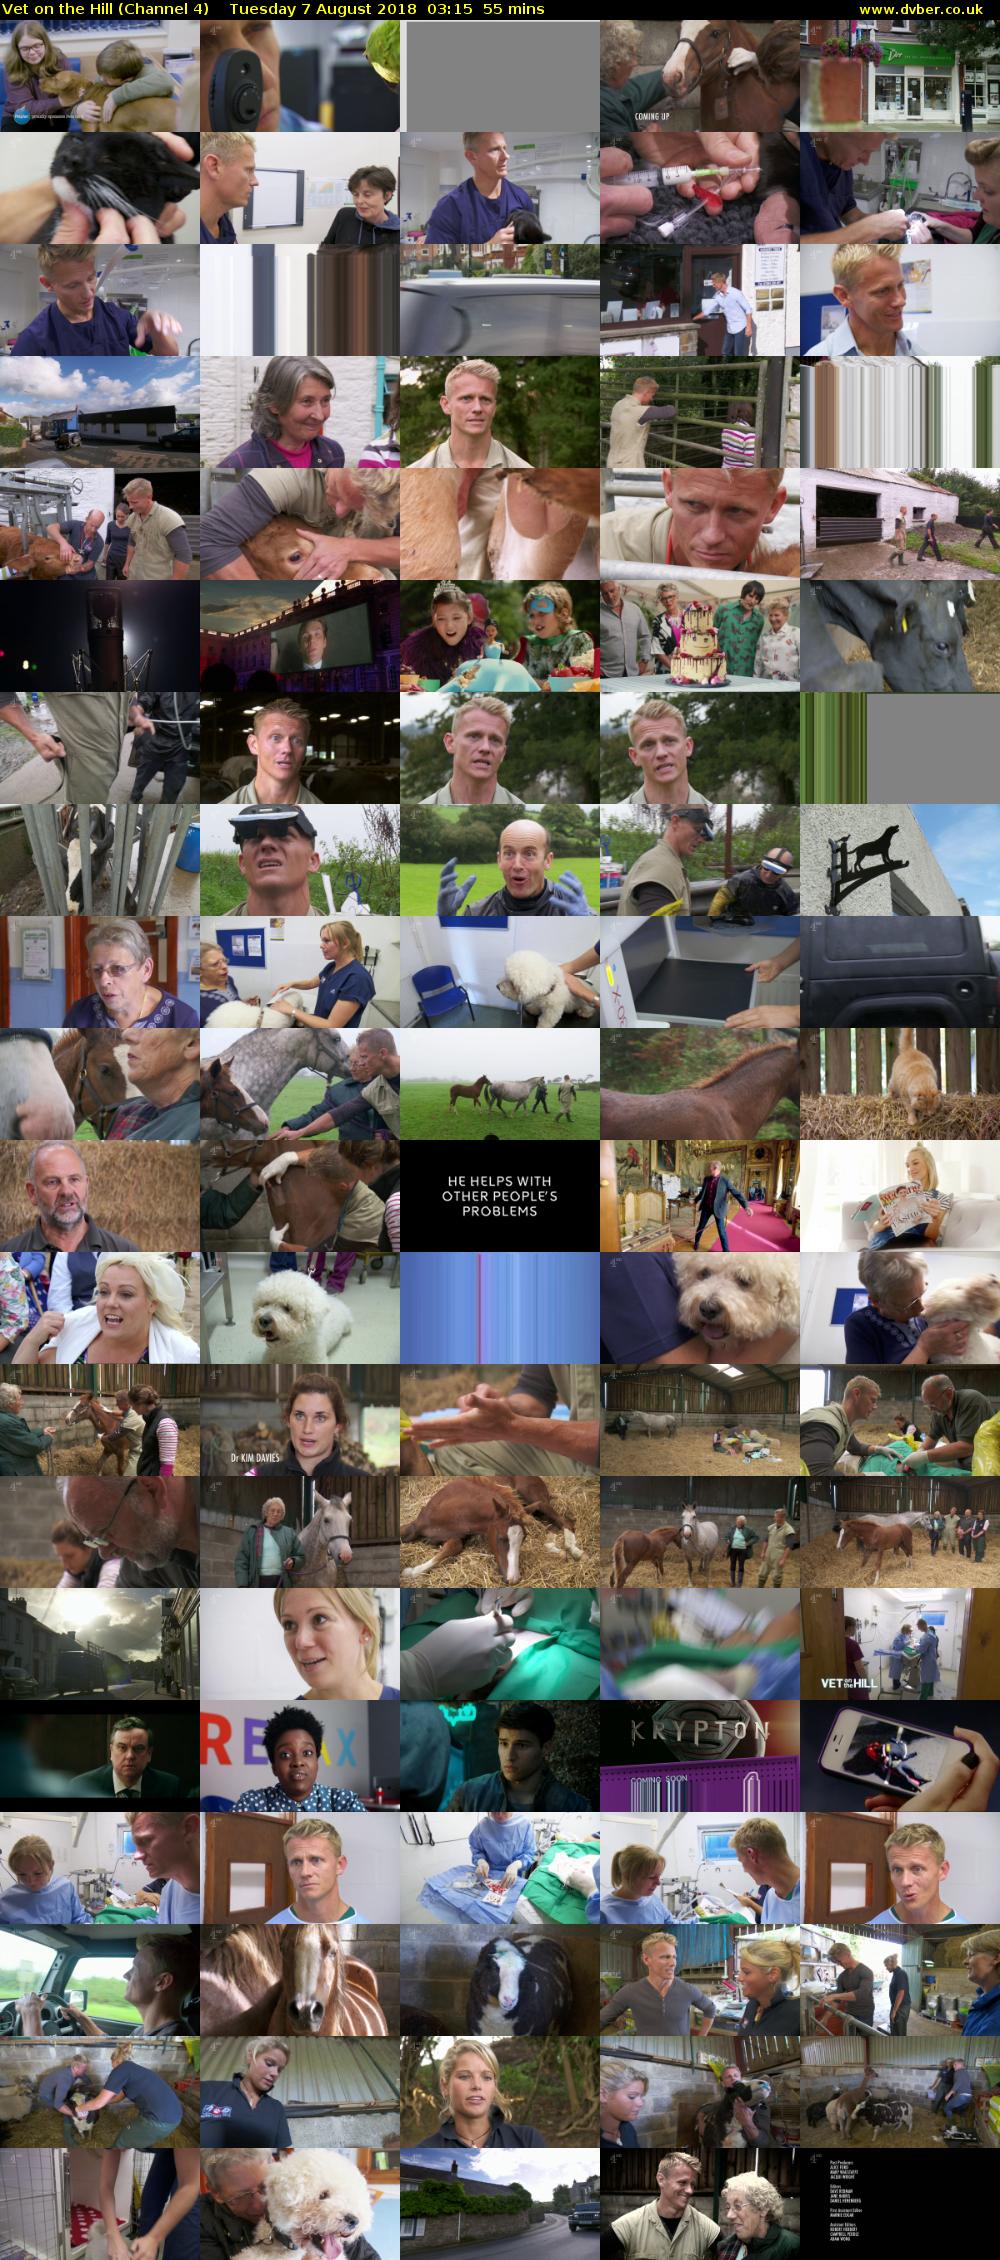 Vet on the Hill (Channel 4) Tuesday 7 August 2018 03:15 - 04:10